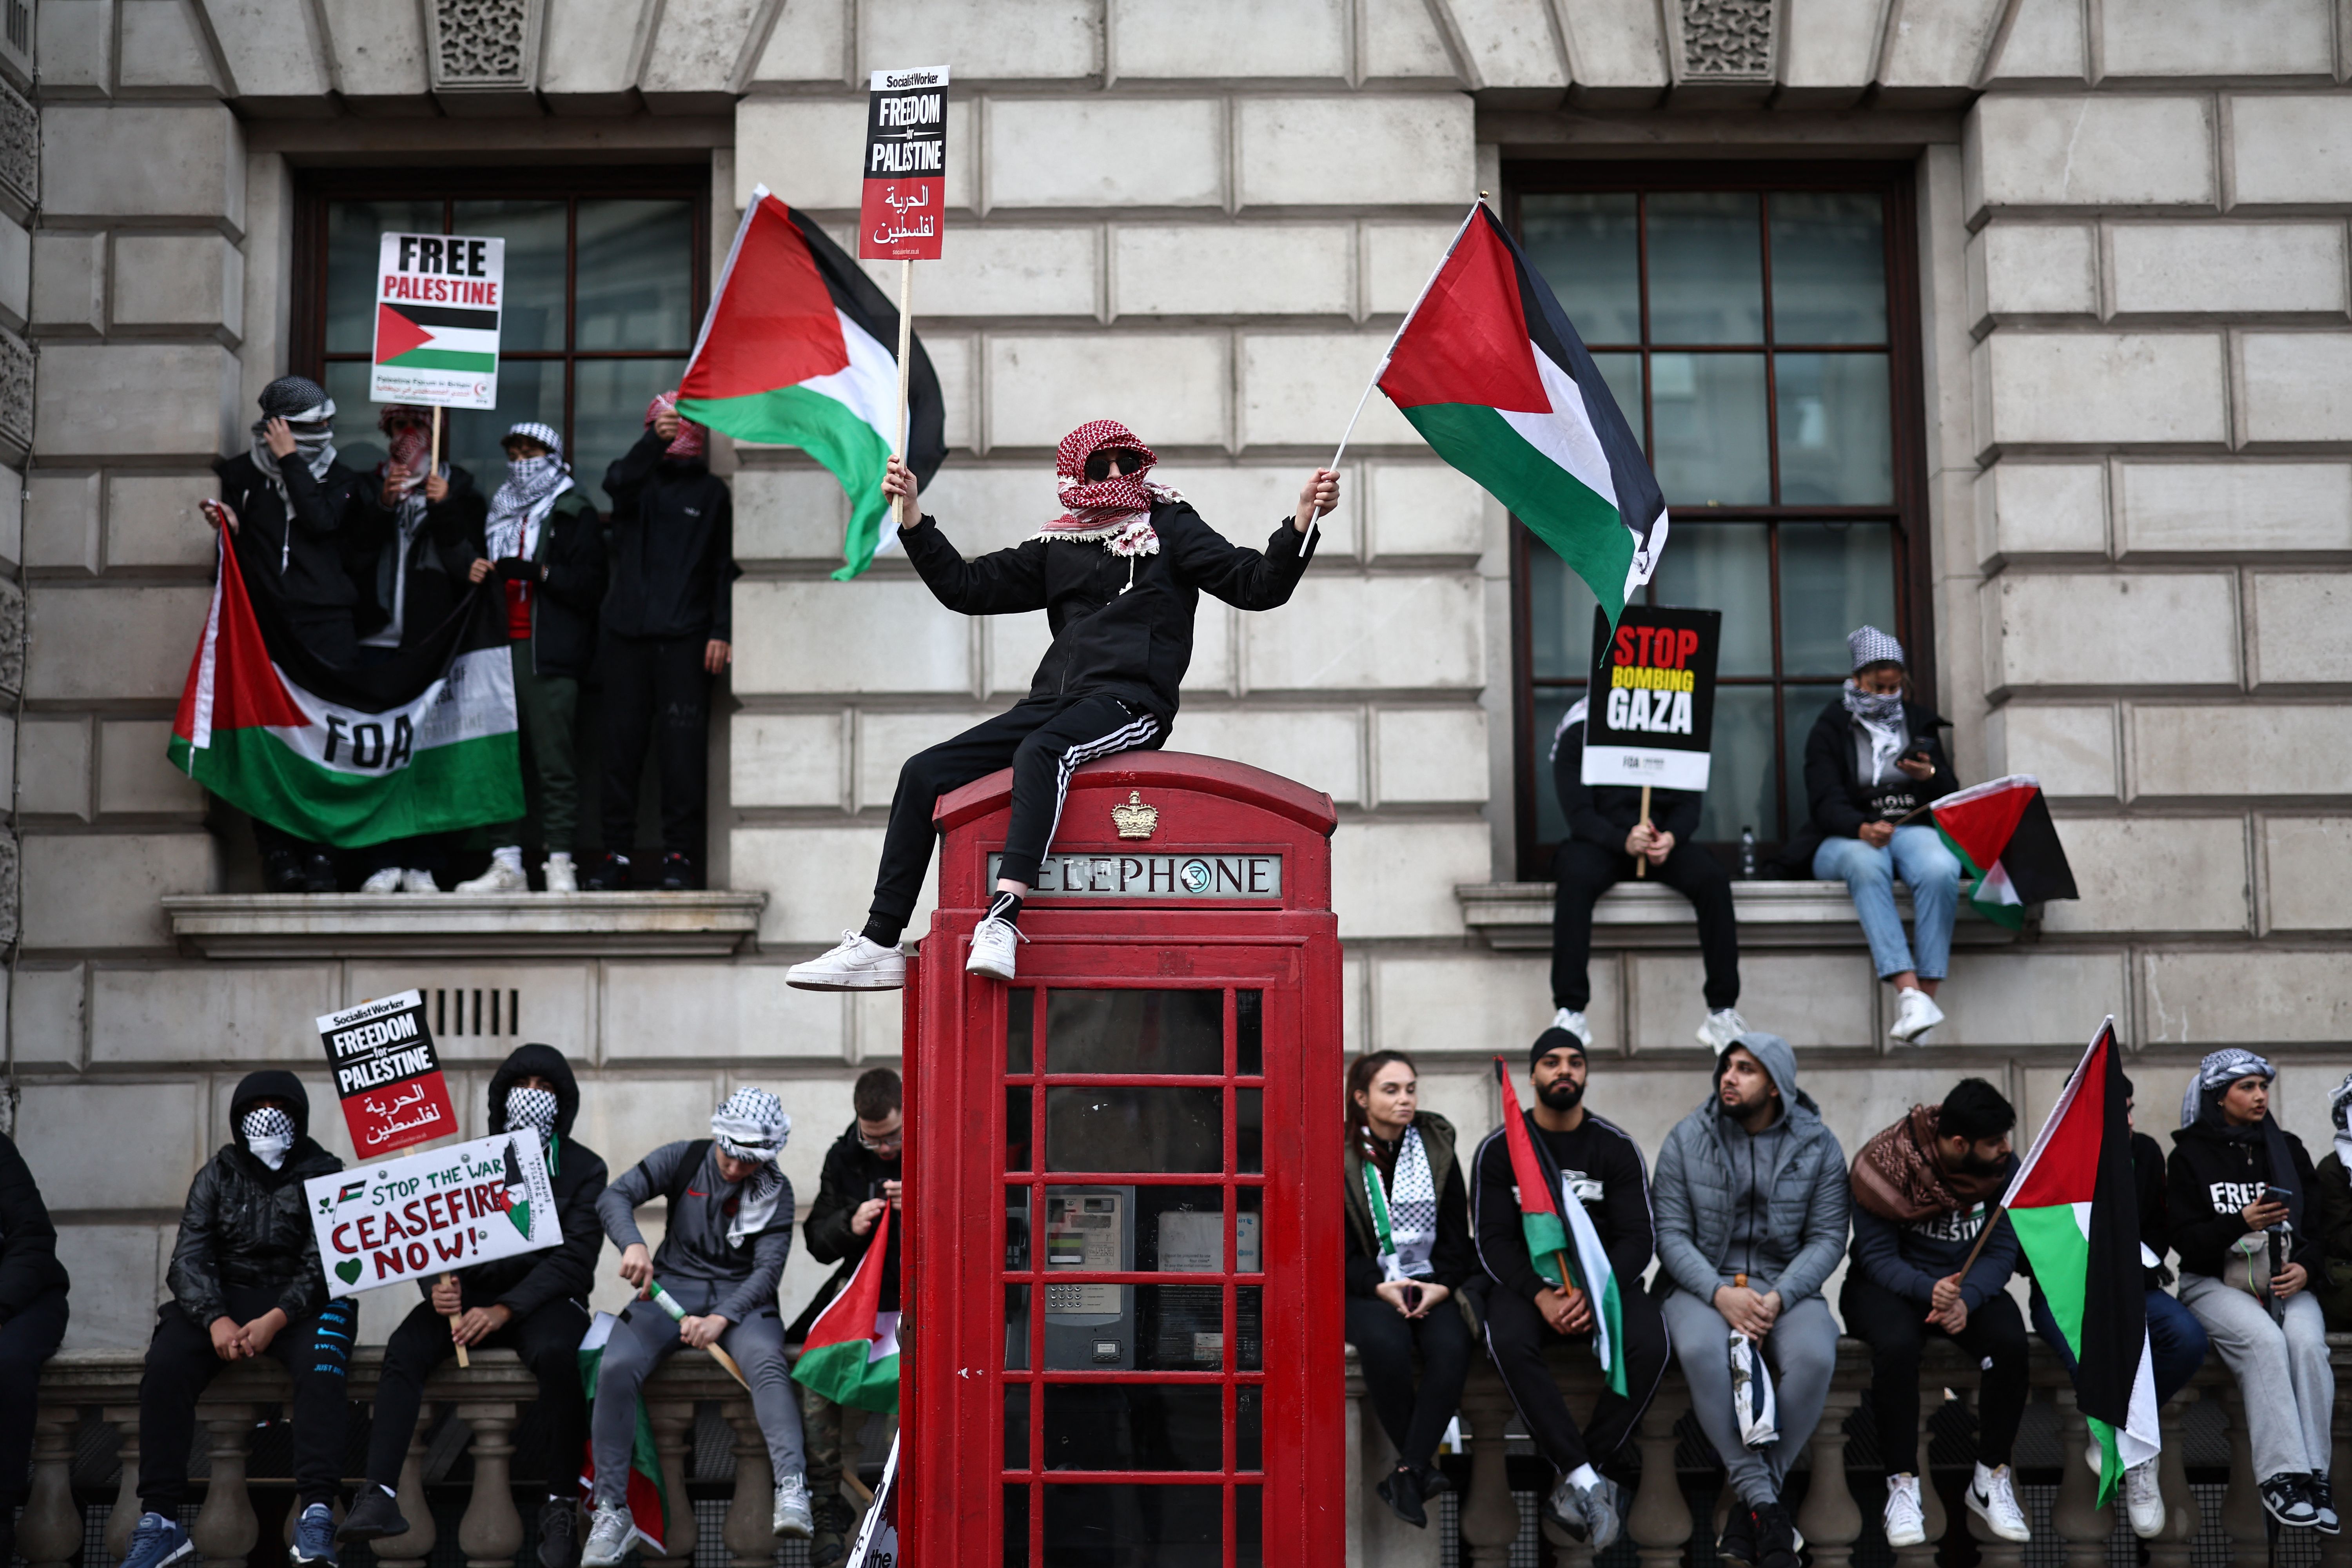 A protester waves Palestinian flags sitting on a red telephone box on Whitehall during the 'March For Palestine' in London, on October 28, to call for a ceasefire in the conflict between Israel and Hamas.